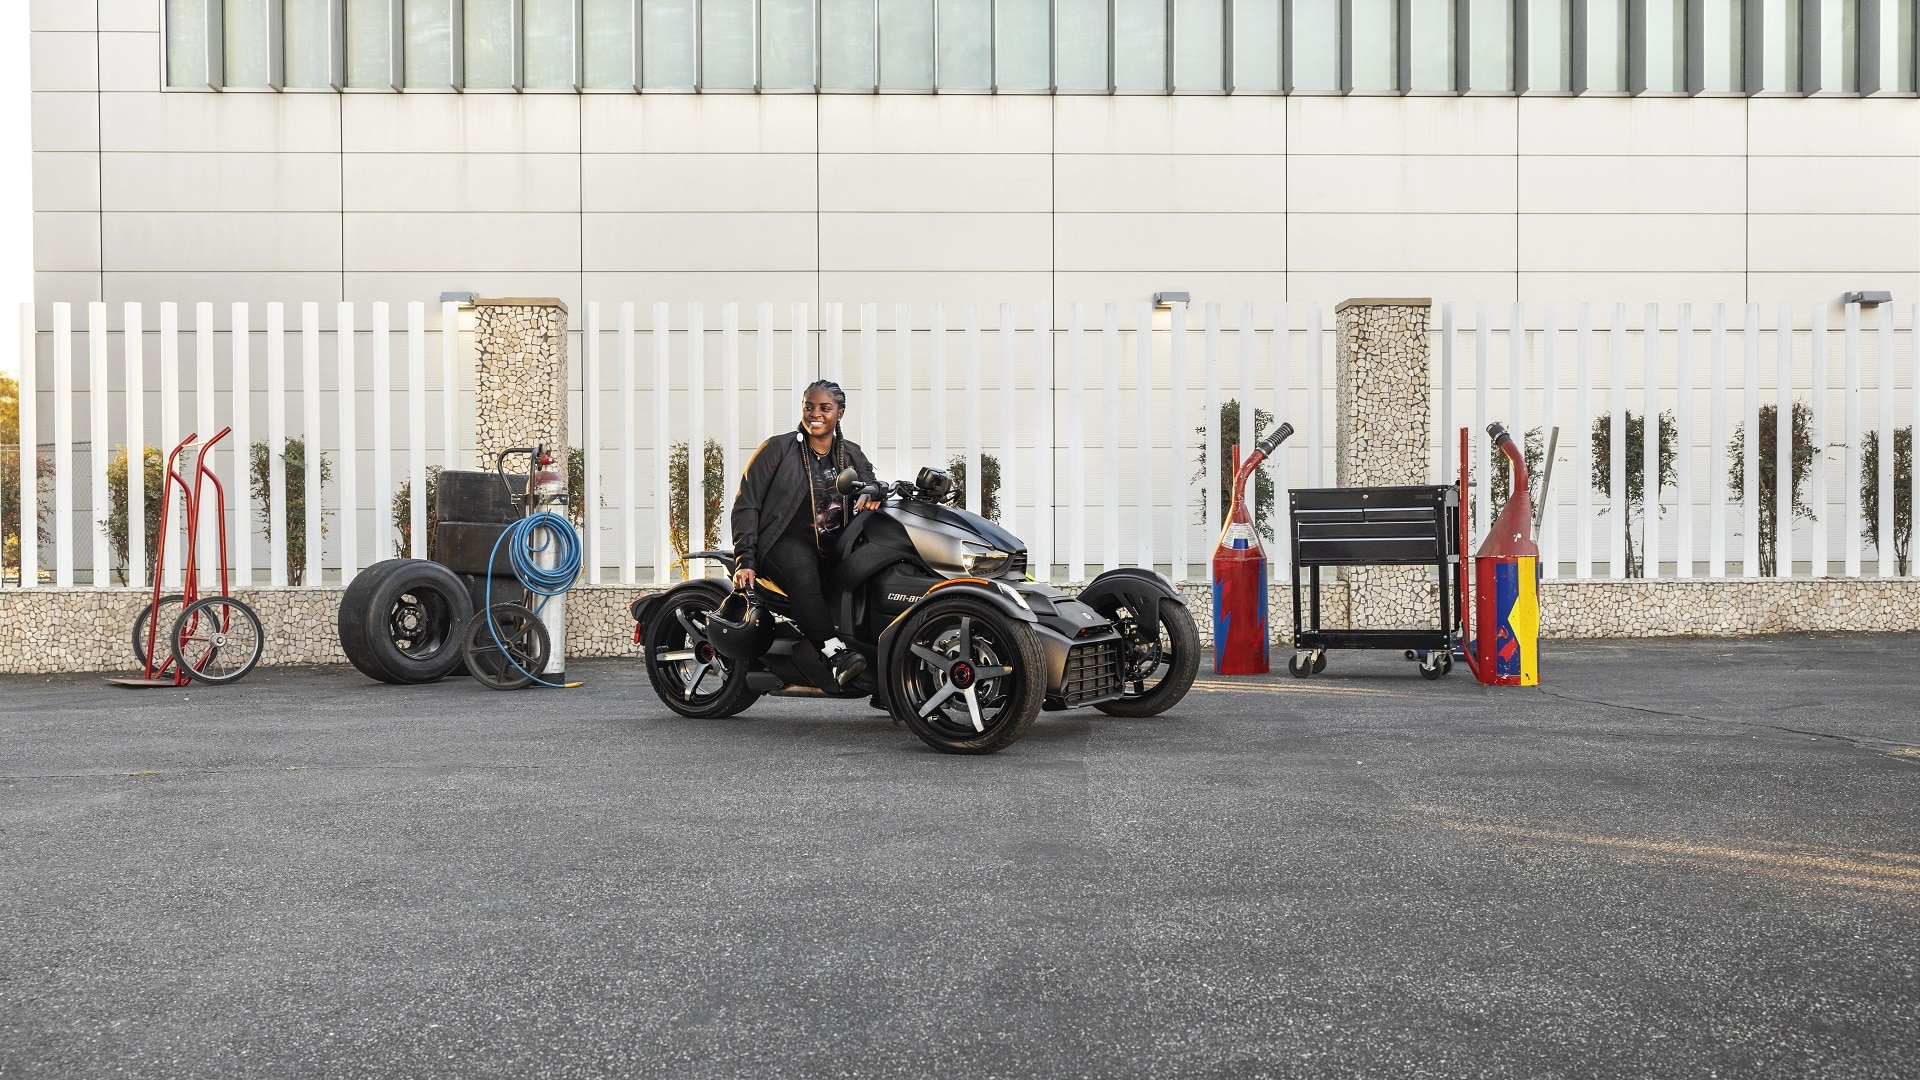 What are the best maintenance products for a Can-Am Ryker or Spyder?